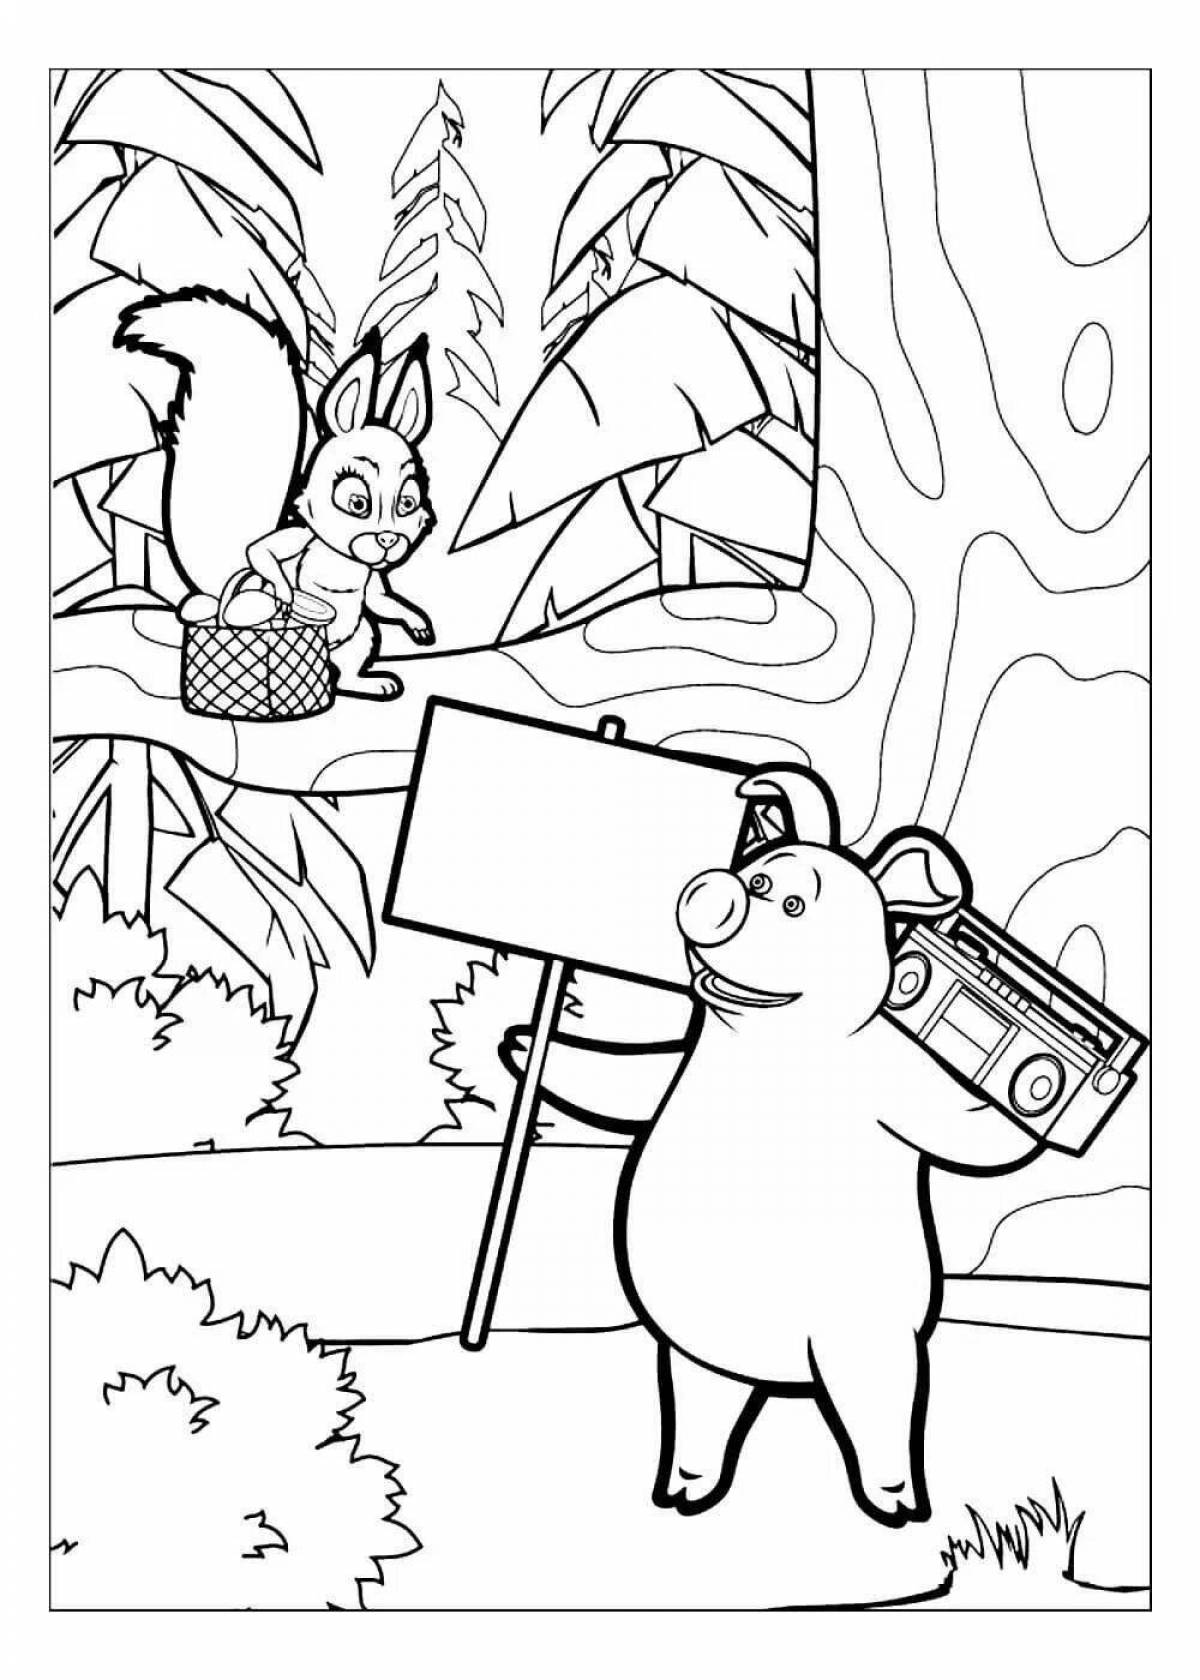 Live teddy bear coloring from masha and bear